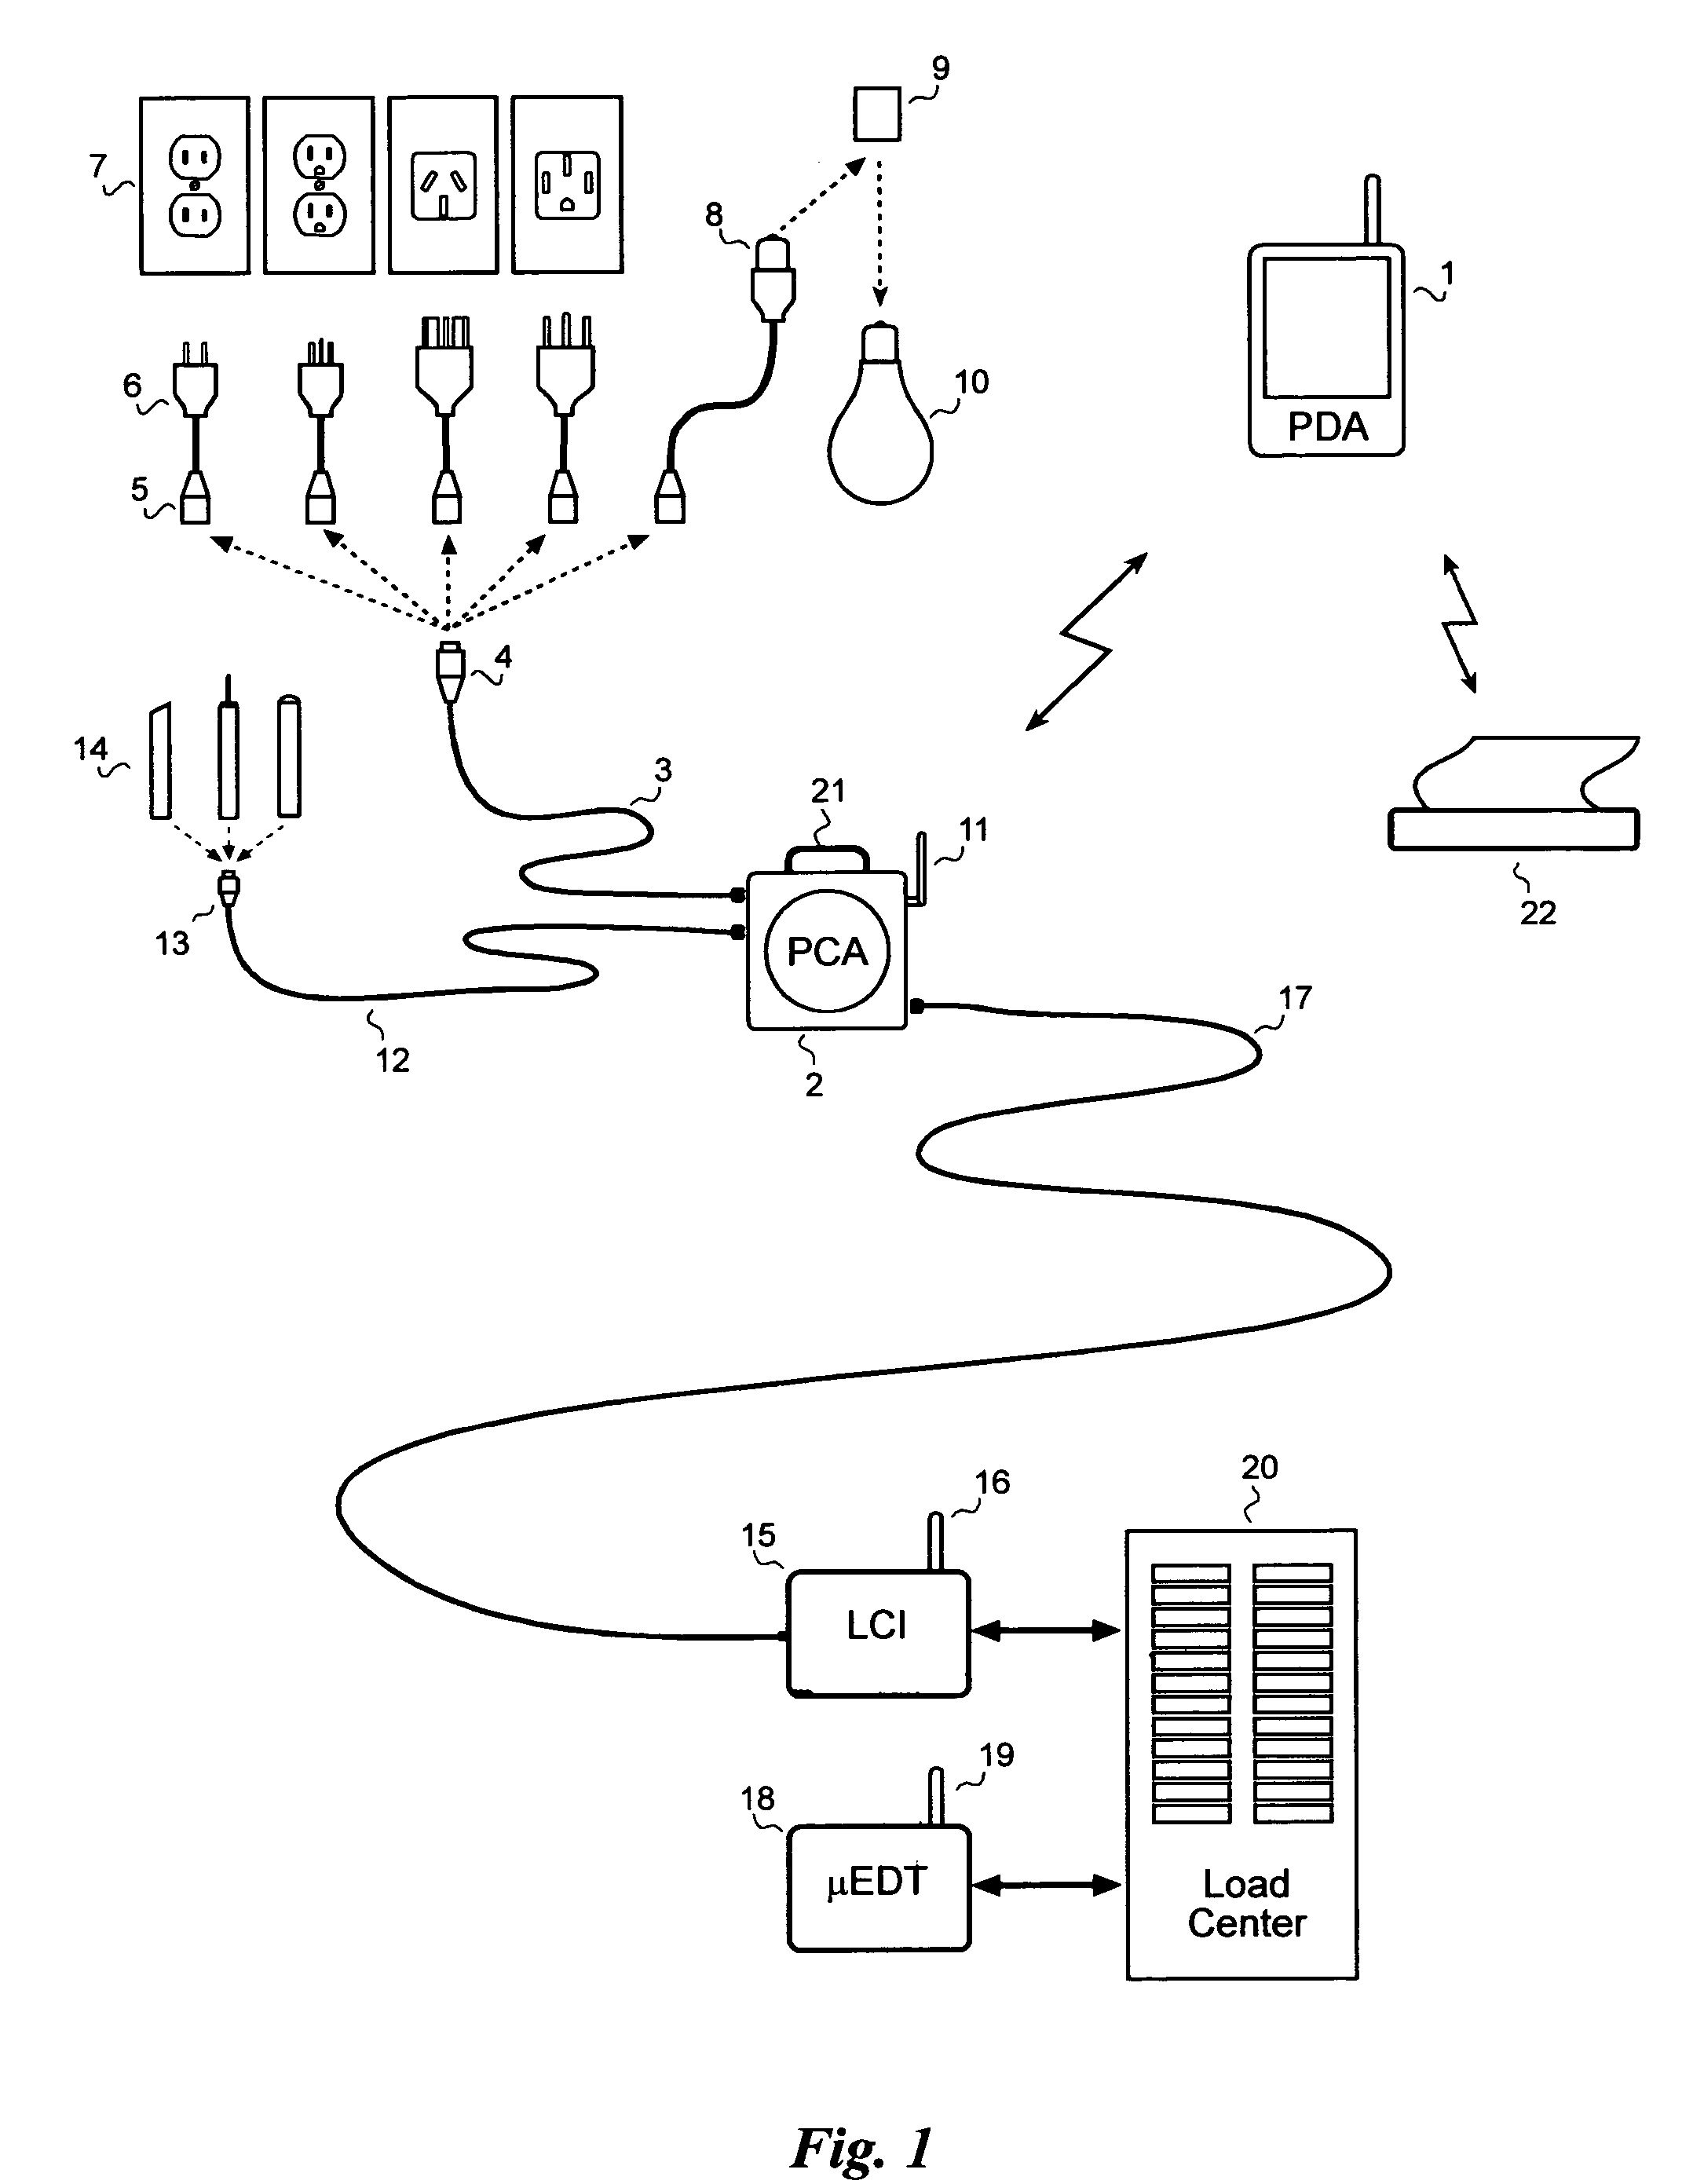 Electrical wiring inspection system